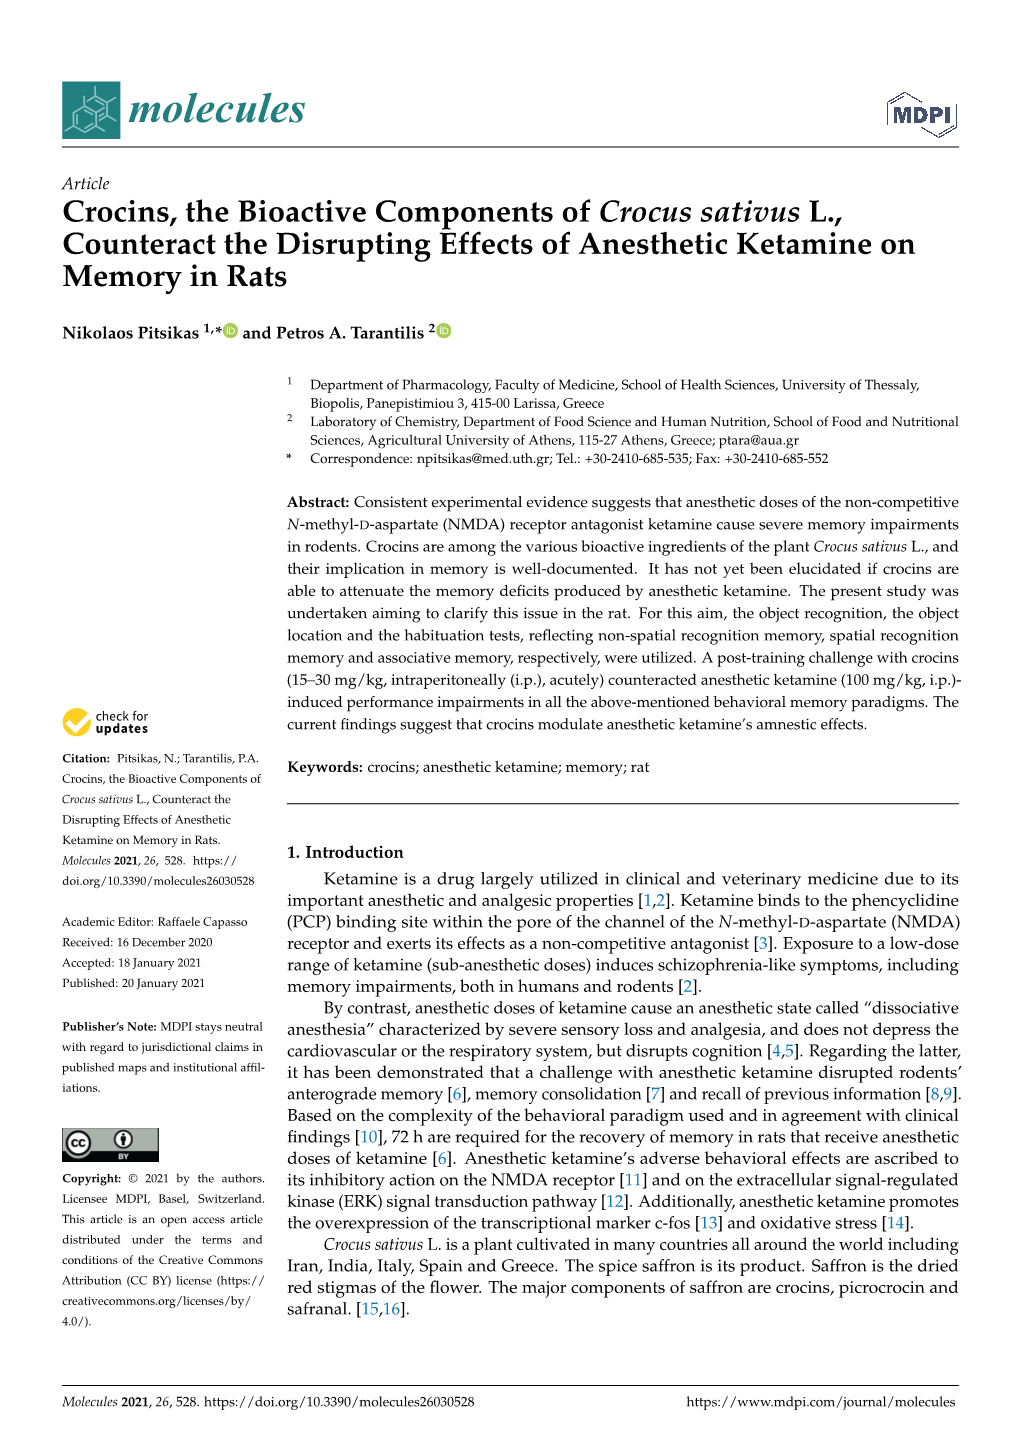 Crocins, the Bioactive Components of Crocus Sativus L., Counteract the Disrupting Effects of Anesthetic Ketamine on Memory in Rats